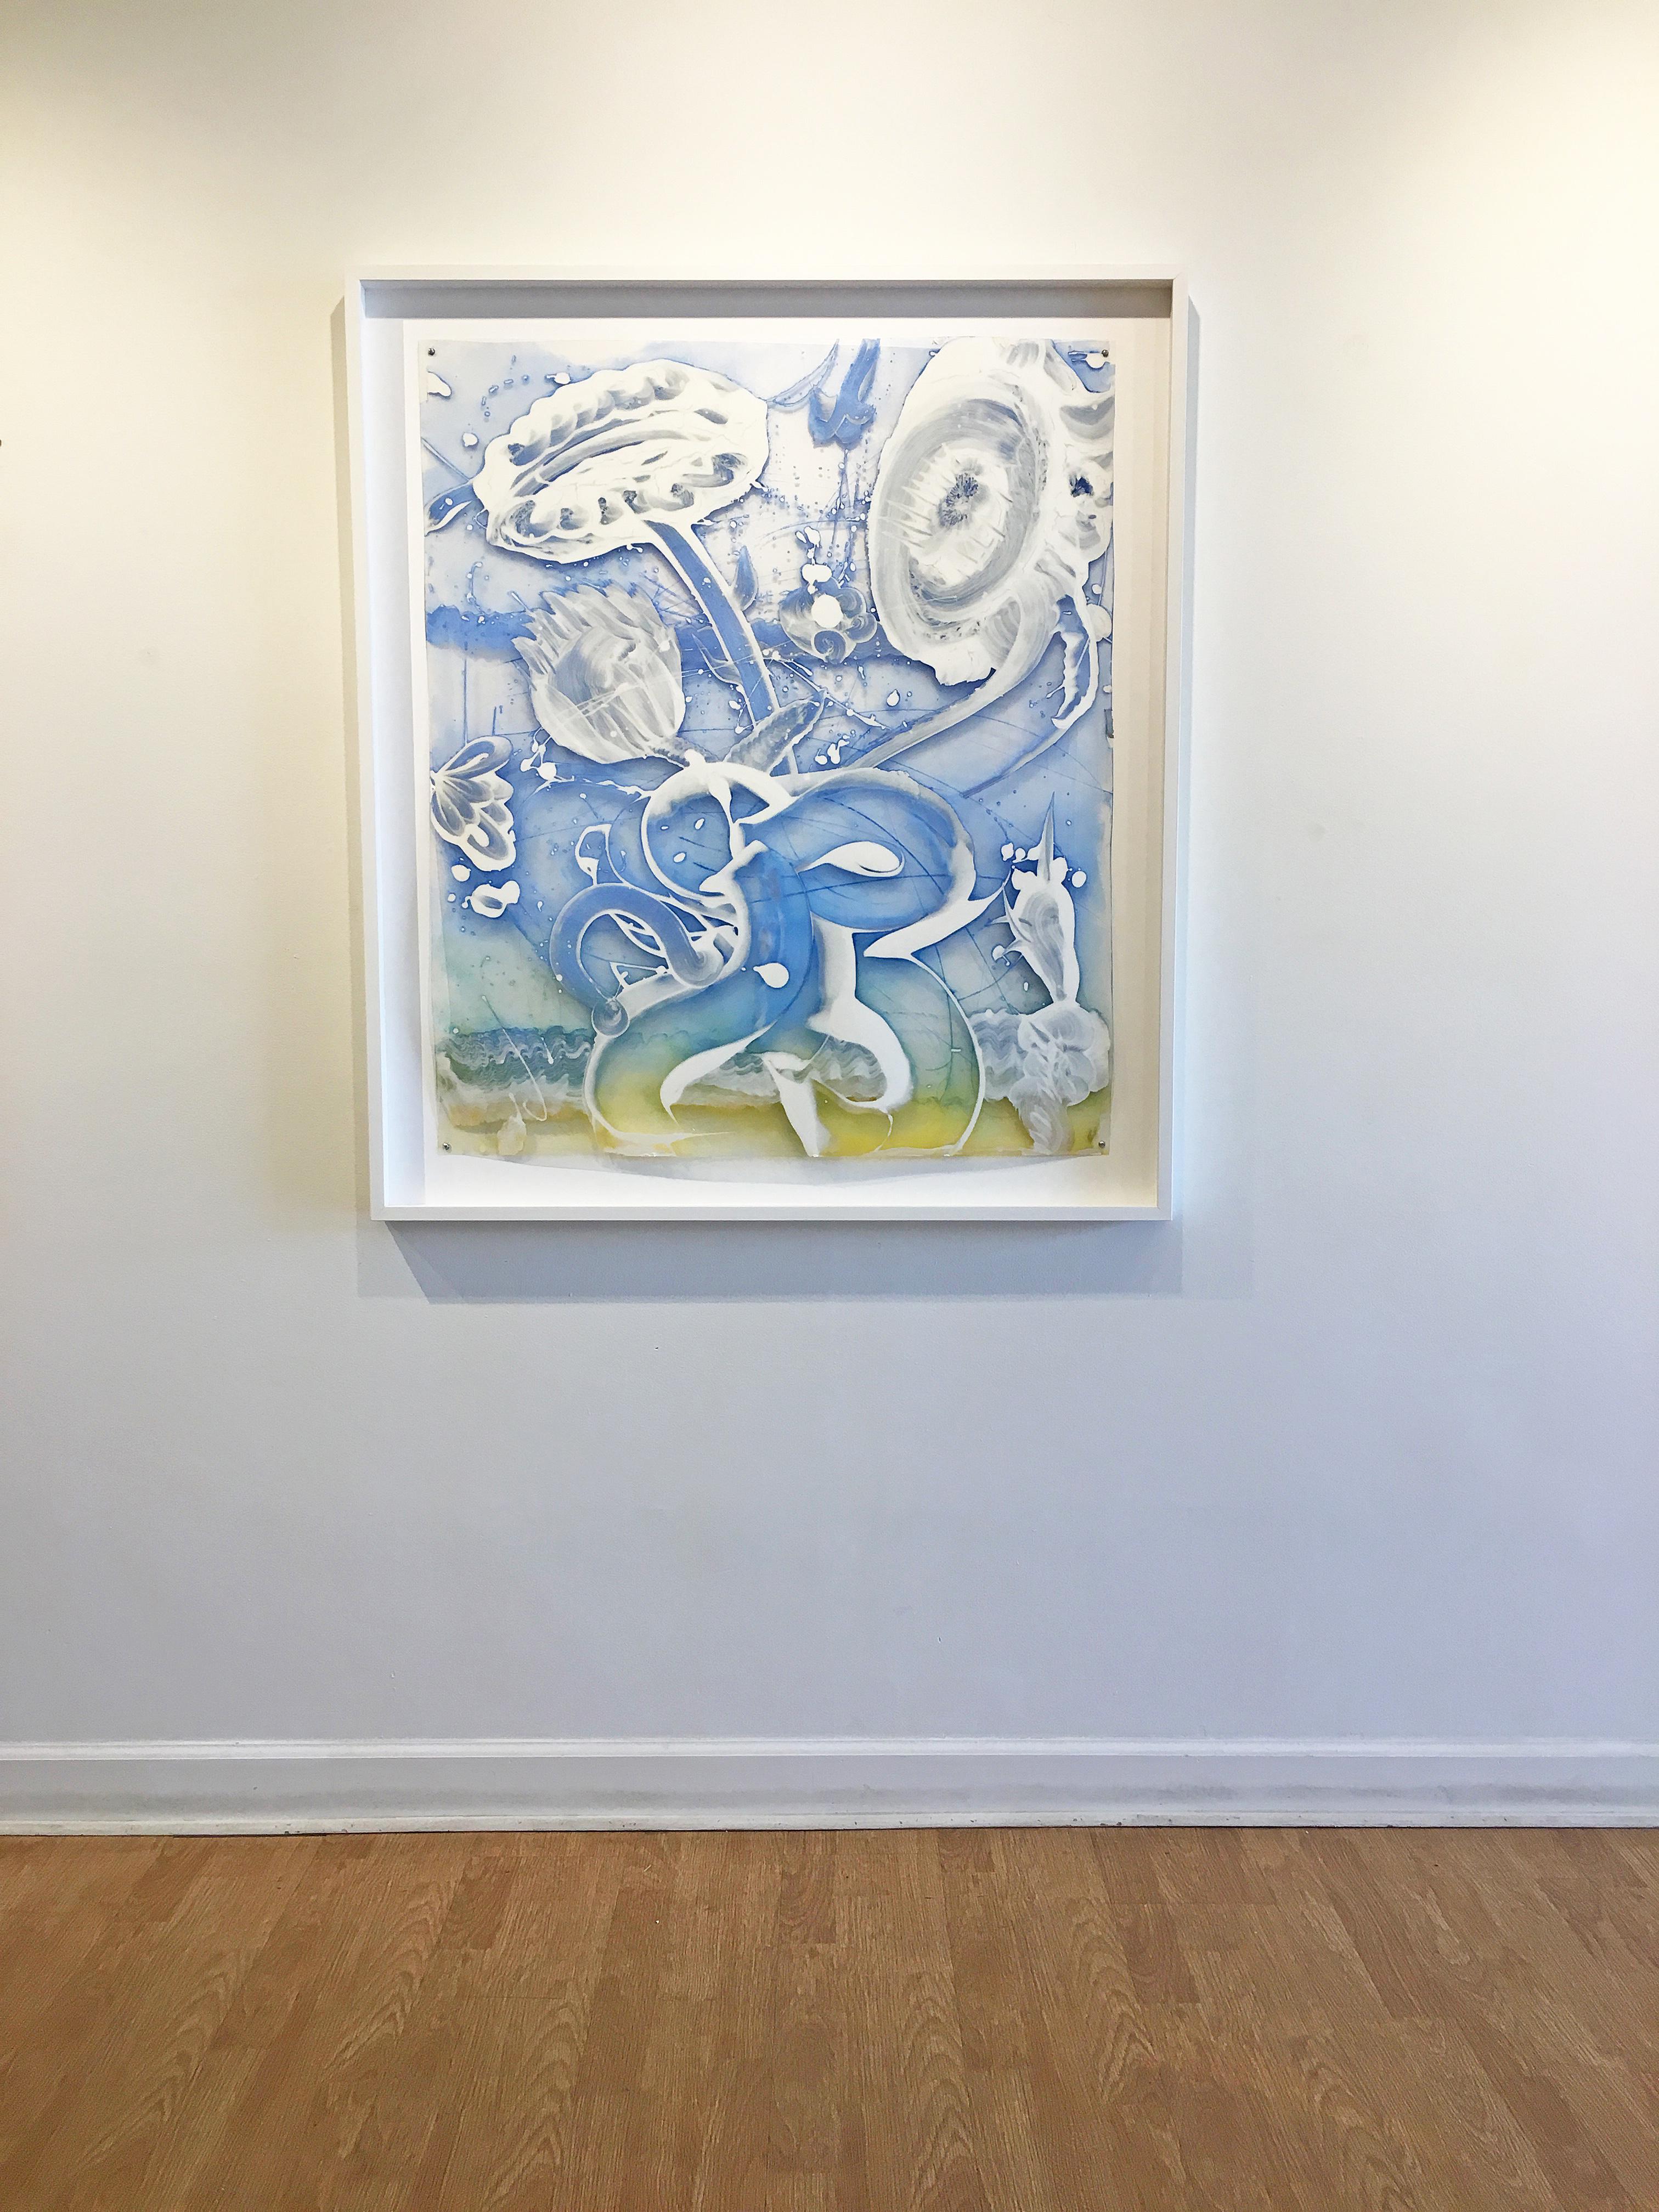 Reverse Mylar Painting, 'Blue Composition (1),' 2017 by Catherine Howe. Molding paste, oil and acrylic mediums on polyester sheeting, 40 x 30 in. / White Frame: 46 x 40.25 in. Howe's reverse-painting is painted with thick, sweeping, gestural